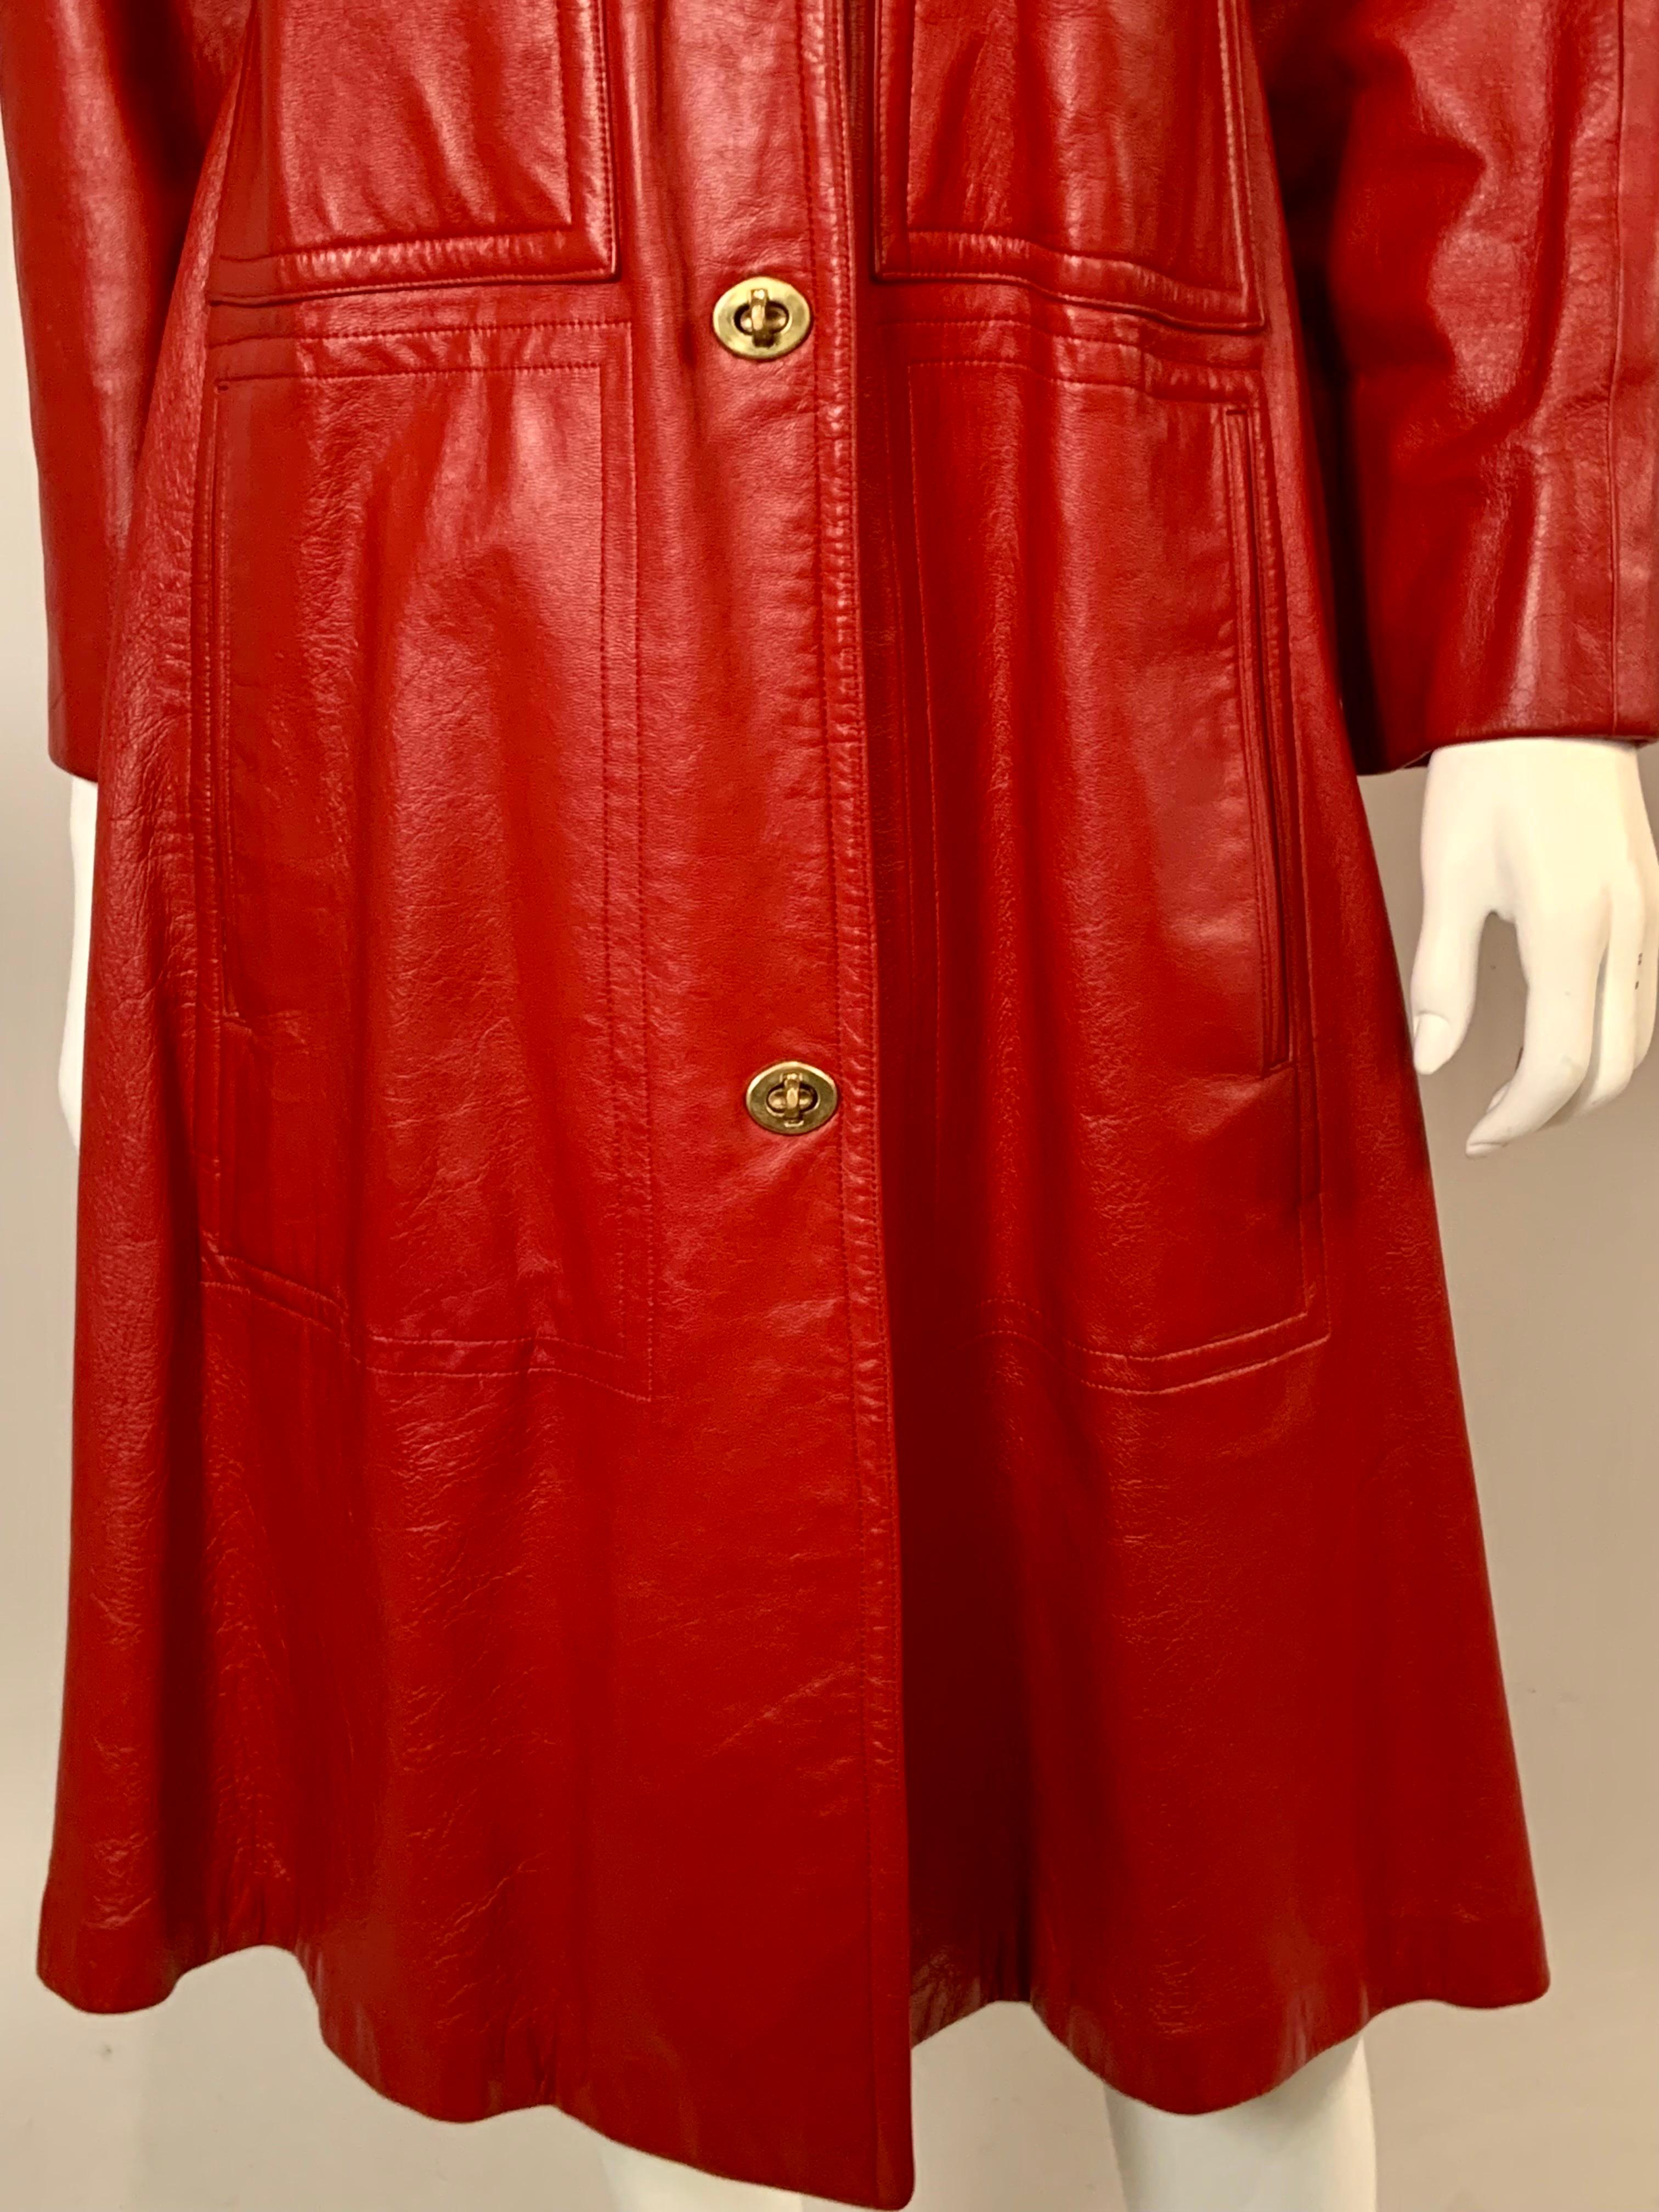 Women's Bonnie Cashin for Sills Red Leather Coat with Brass Toggle Closures For Sale